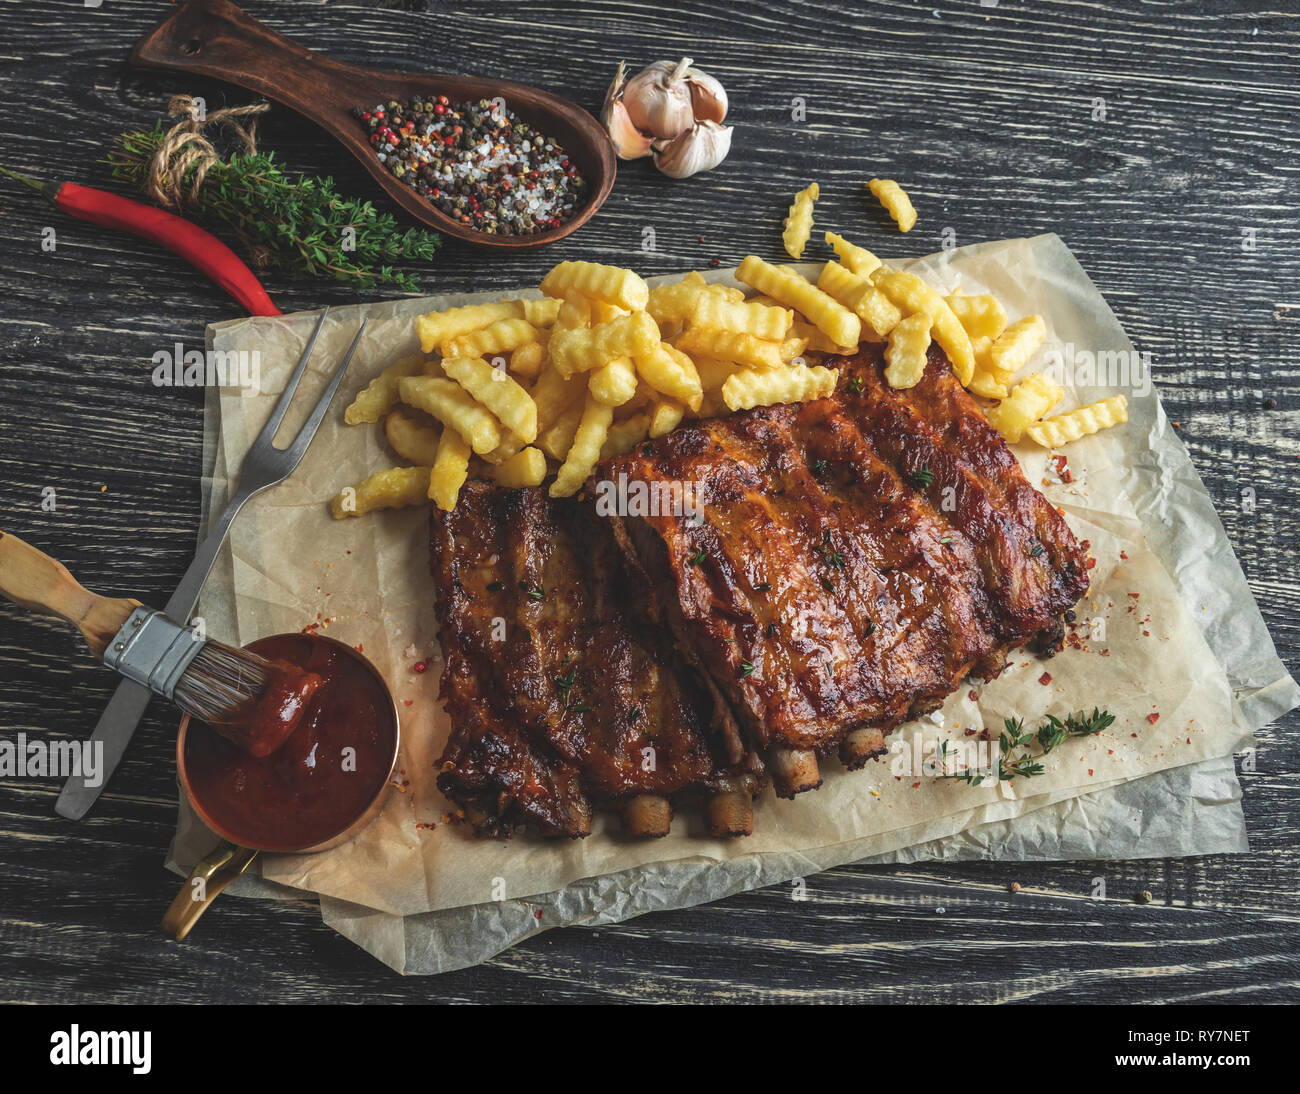 grilled pork ribs with sauce on a cutting board, french fries, spices, wooden background Stock Photo